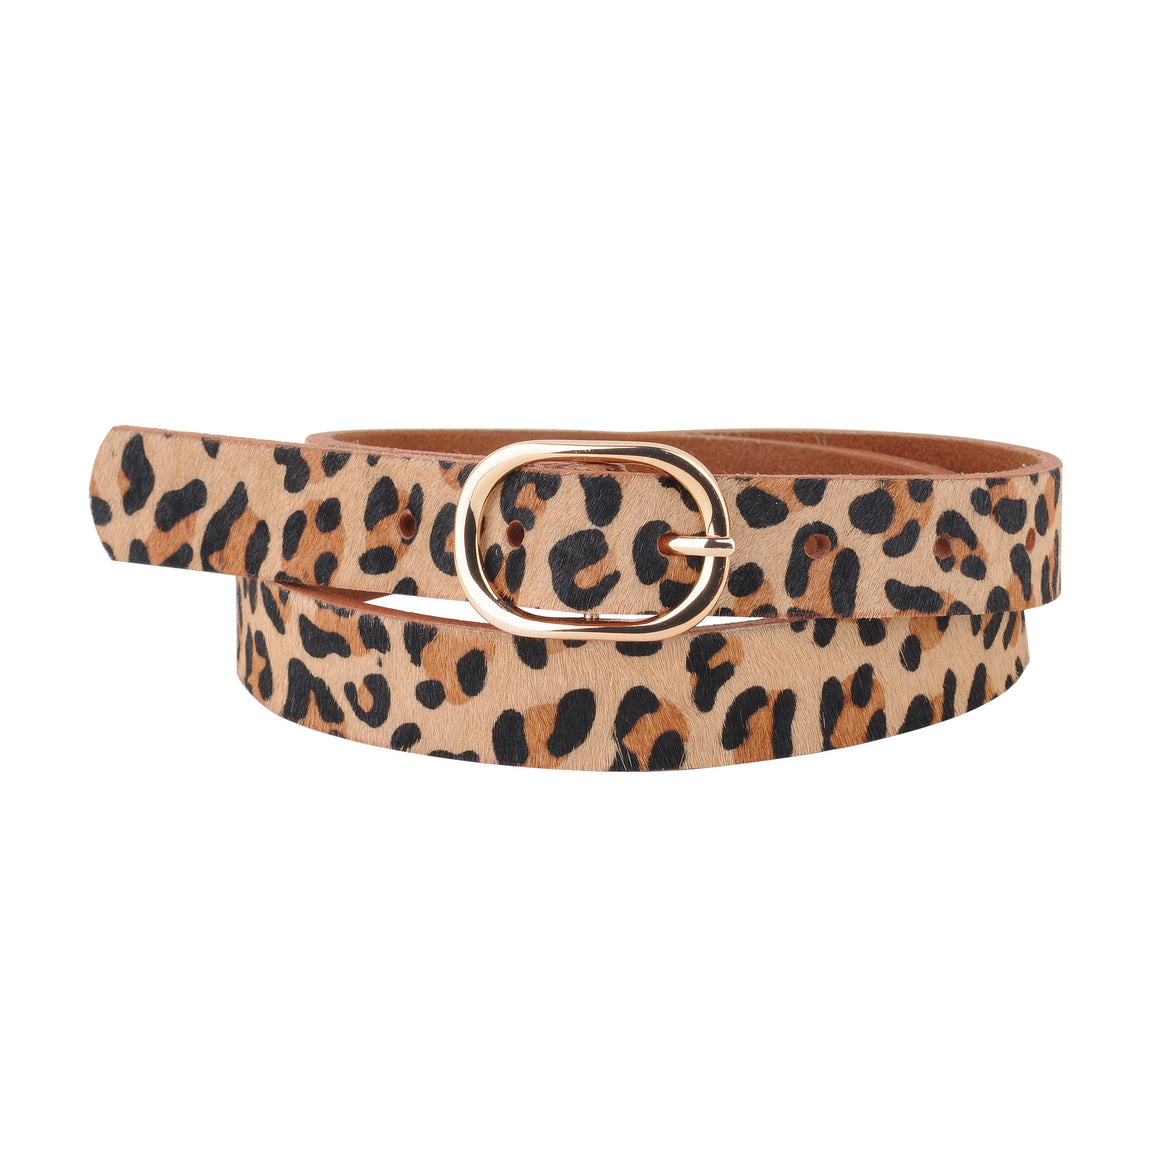 Women's Leopard Print Calf Hair Genuine Leather Belt with Gold Buckle